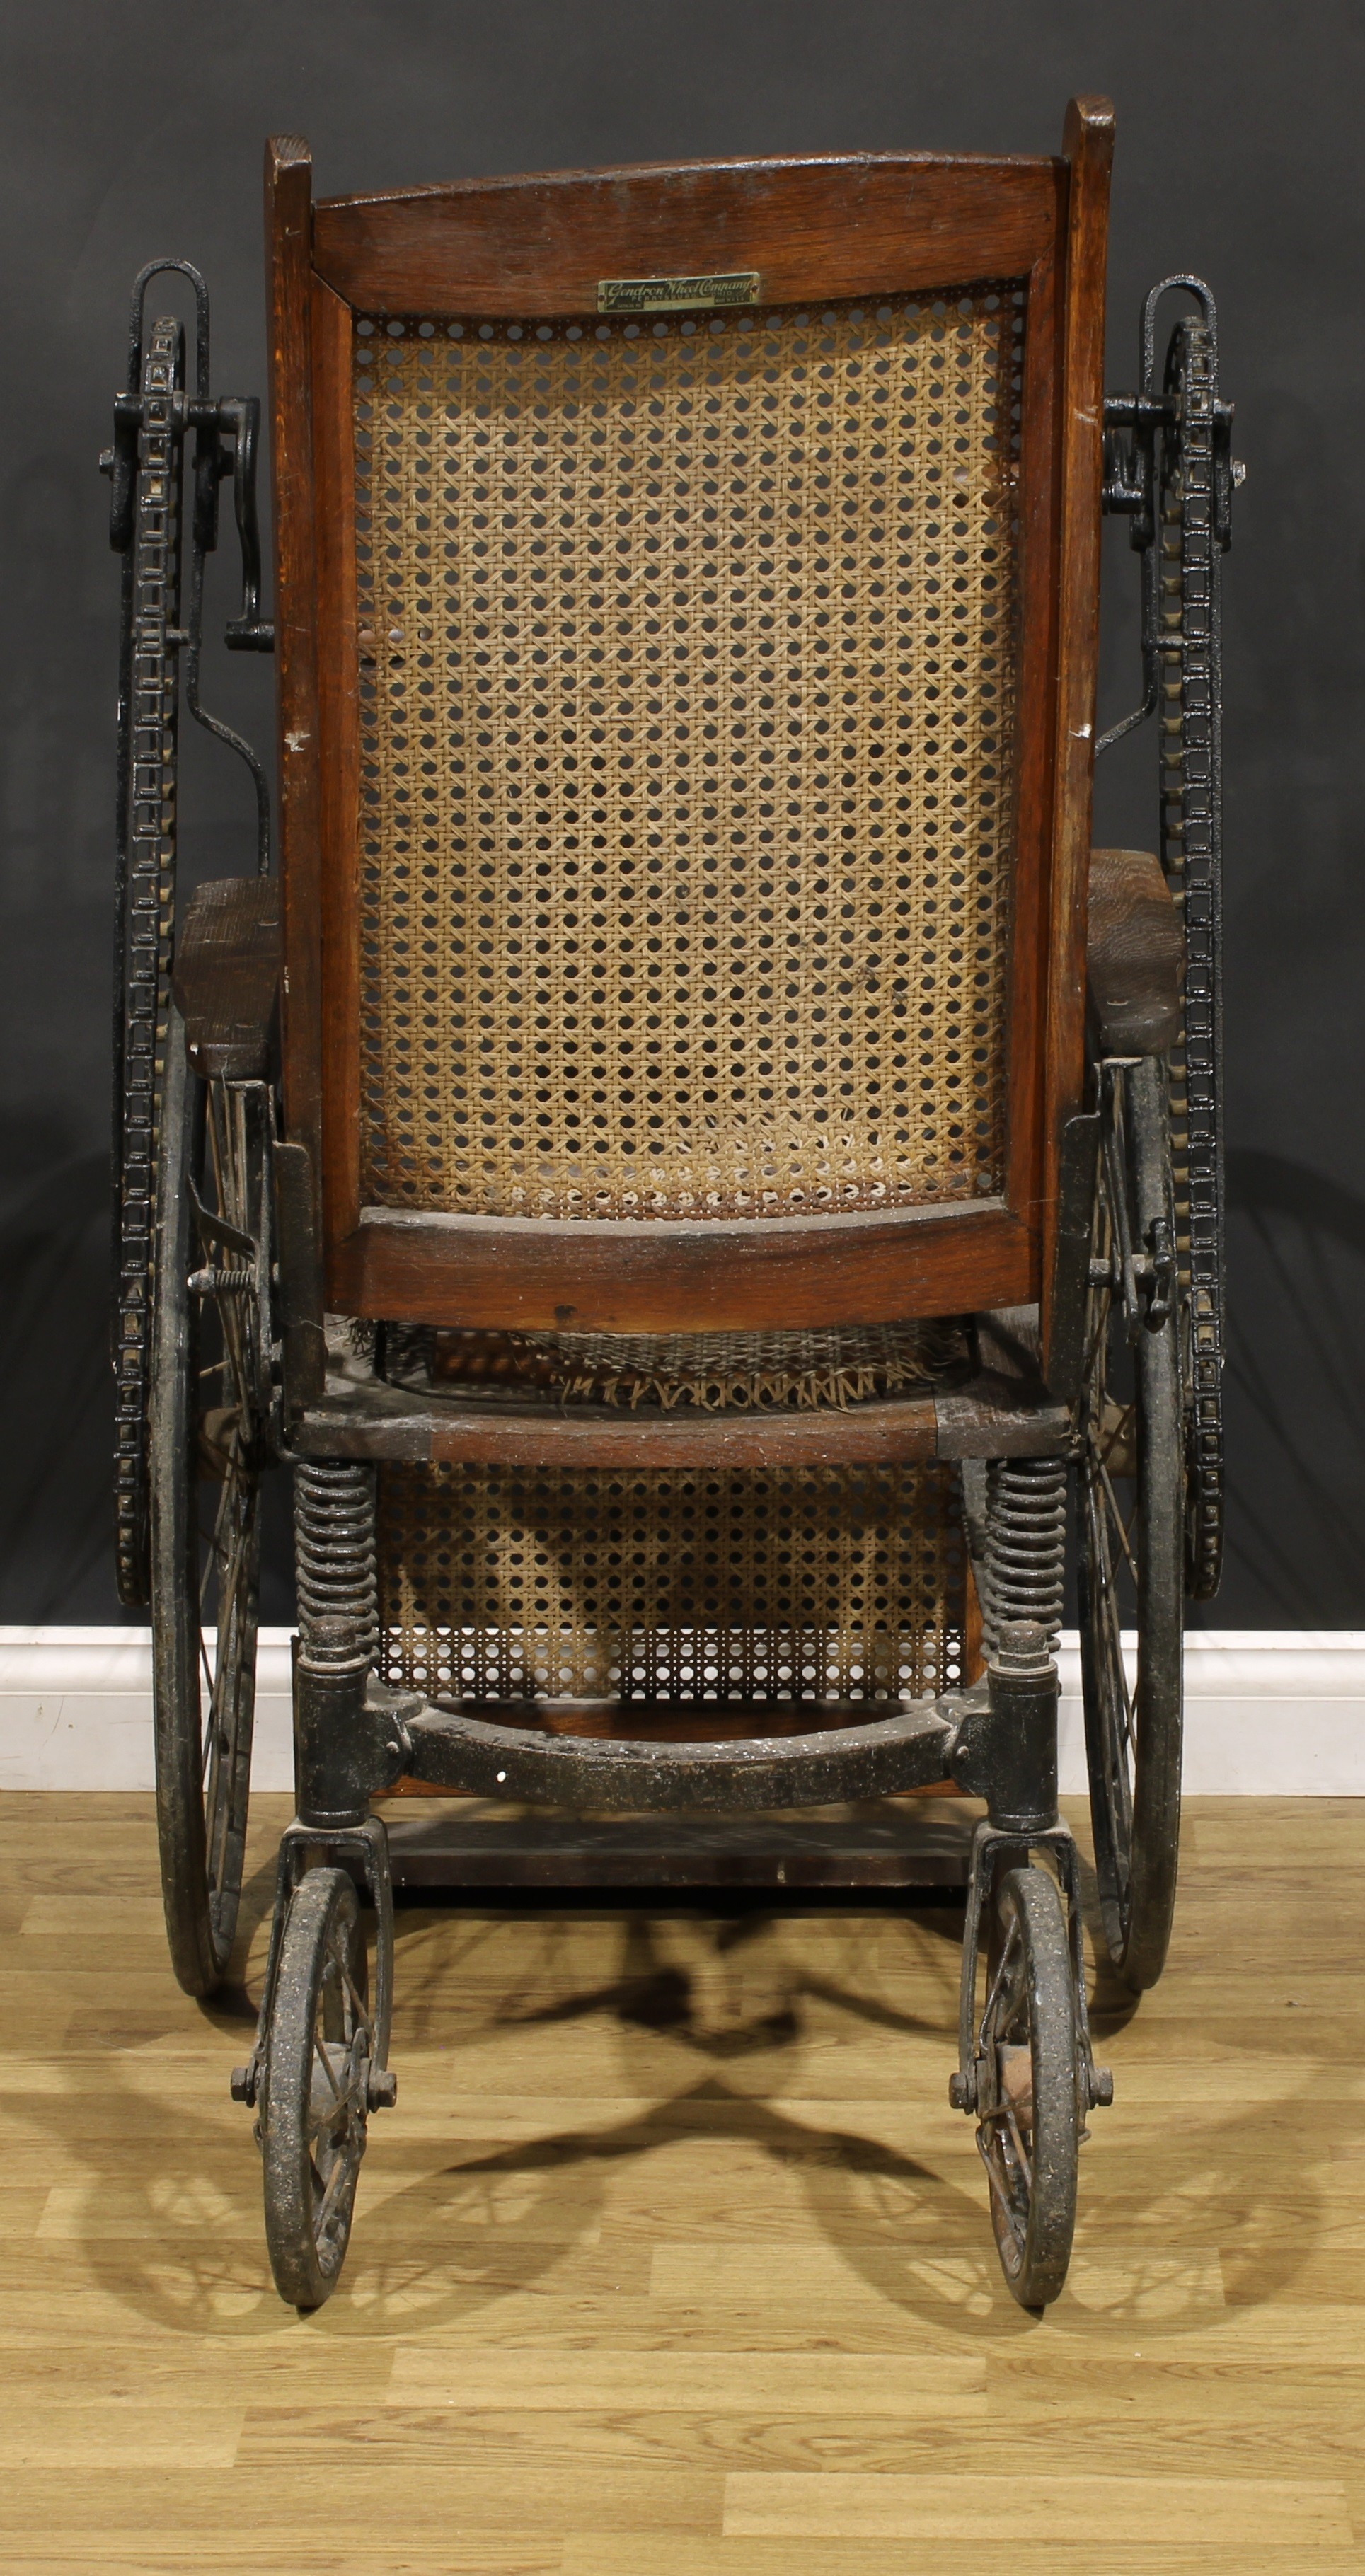 An early to mid-20th century American oak hand-crank wheelchair, by Gendron Wheel Company, - Image 4 of 5